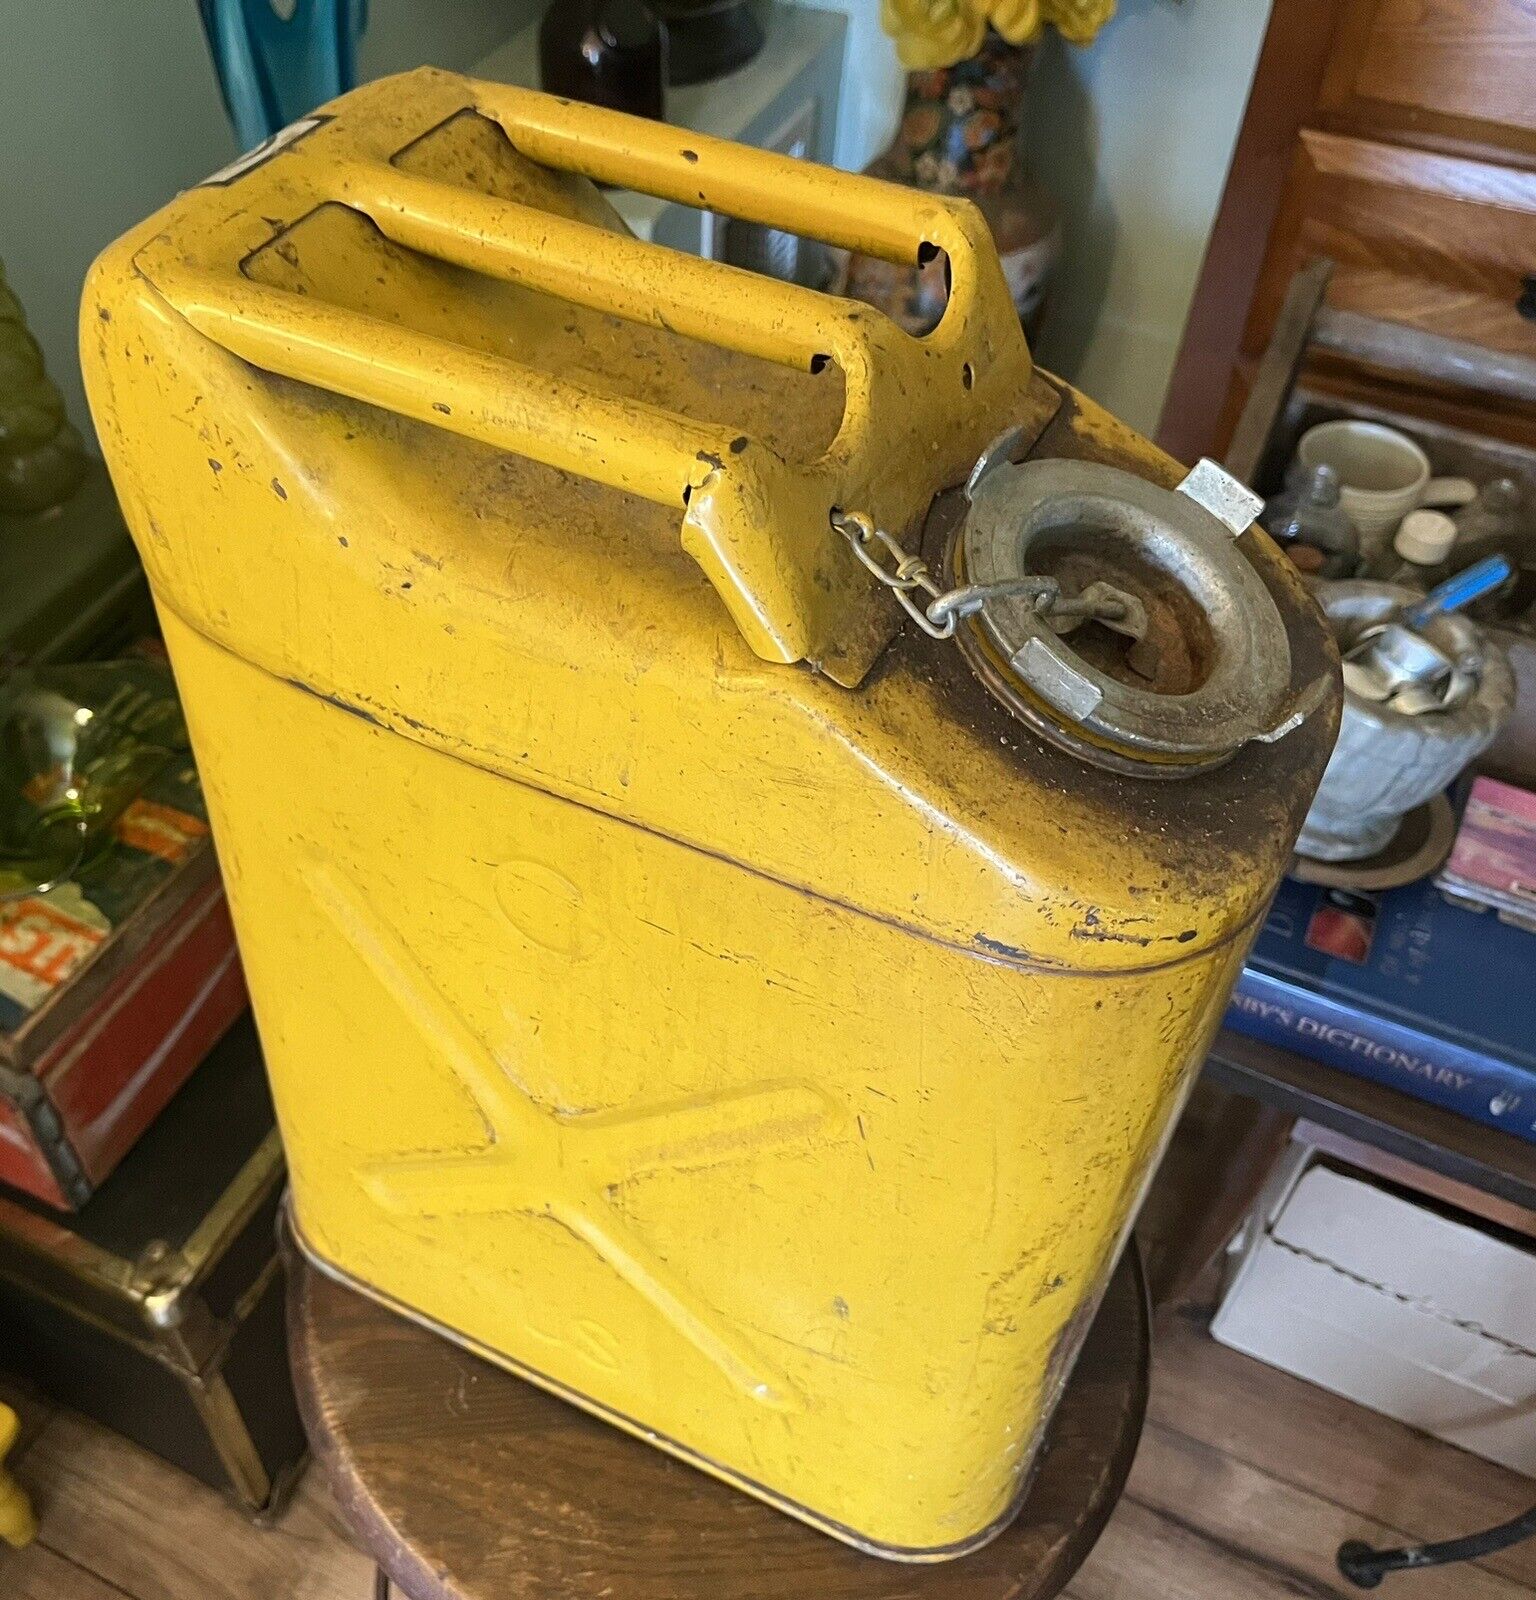 RARE YELLOW METAL 5 LITER MILITARY JERRY CAN 1978, Industrial Mancave Display